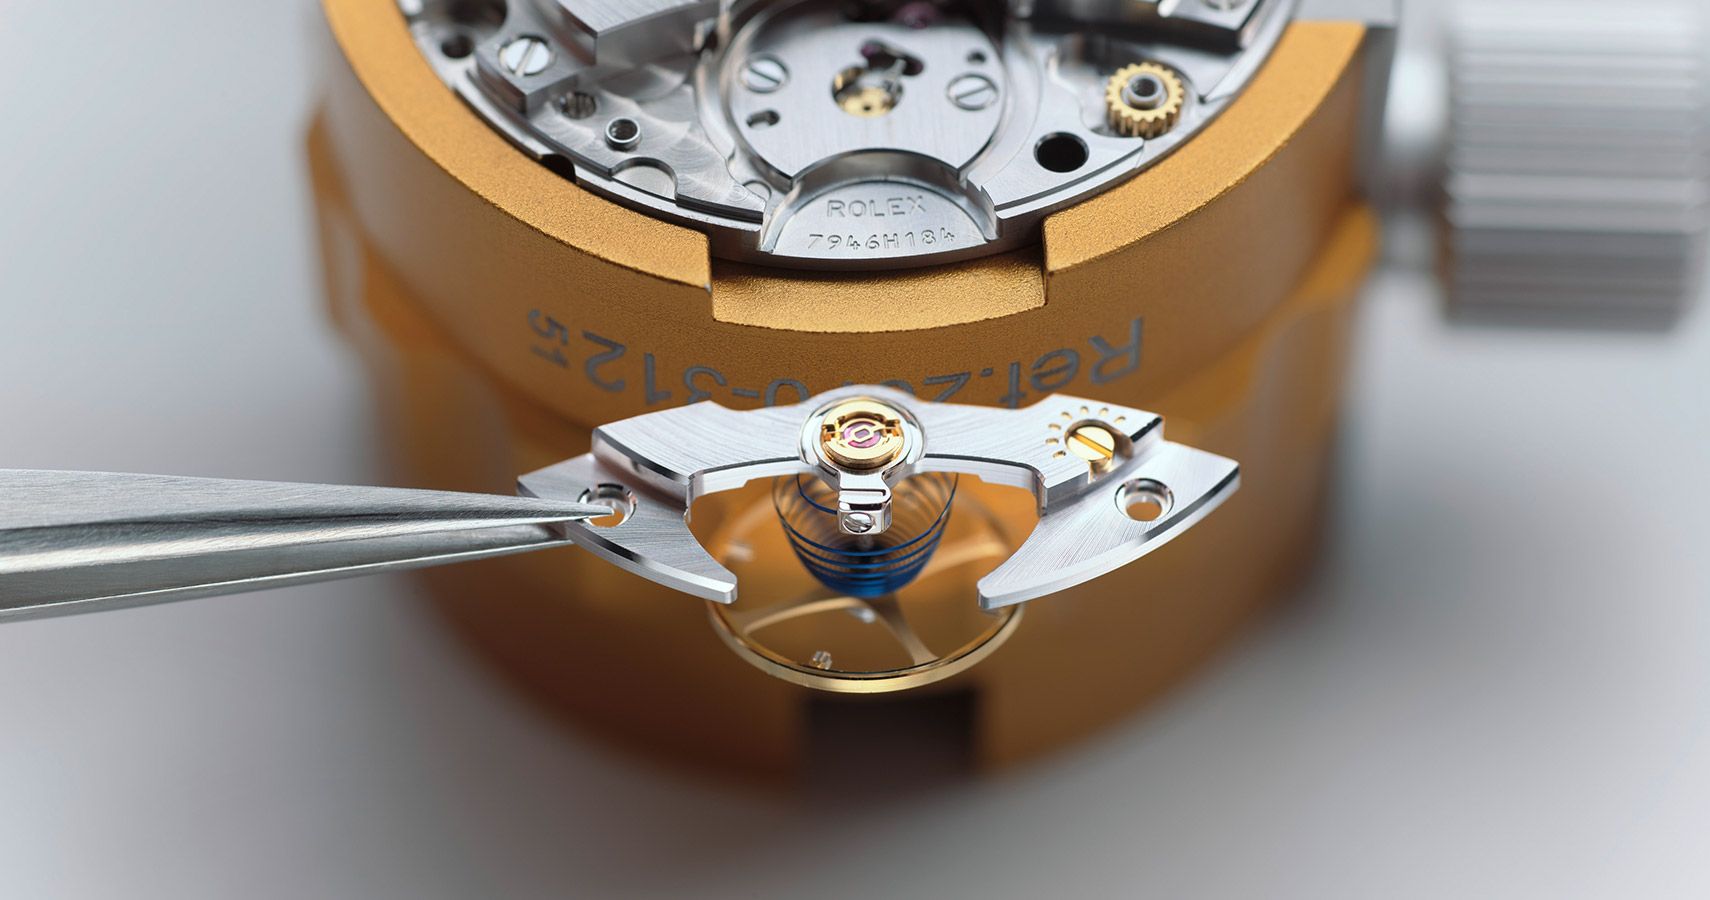 The cleaned components are dried, after which the movement is entirely reassembled and lubricated.
The watchmaker makes the first adjustments to the precision of the movement according to the brand’s accuracy criteria.